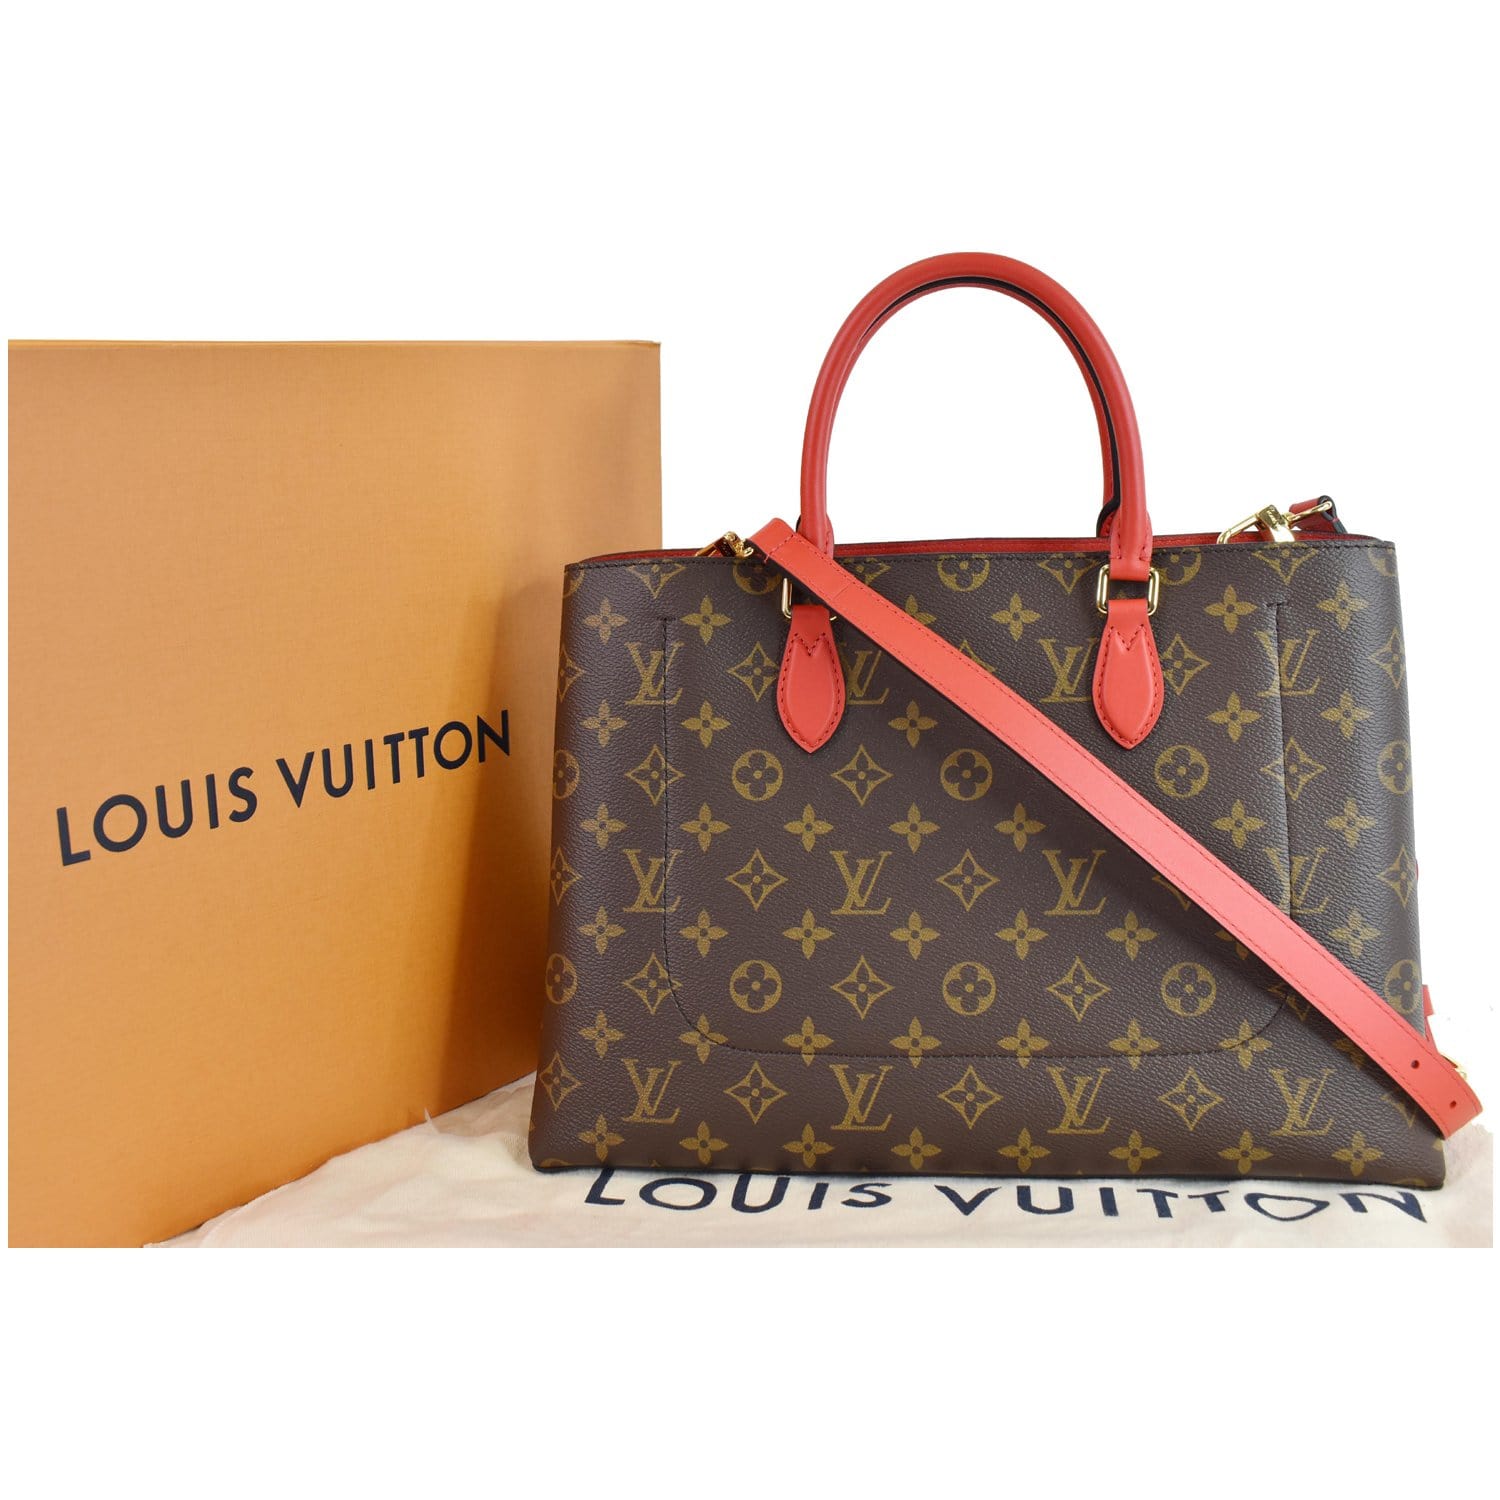 LV Long Chequered Brown Flower Pattern 